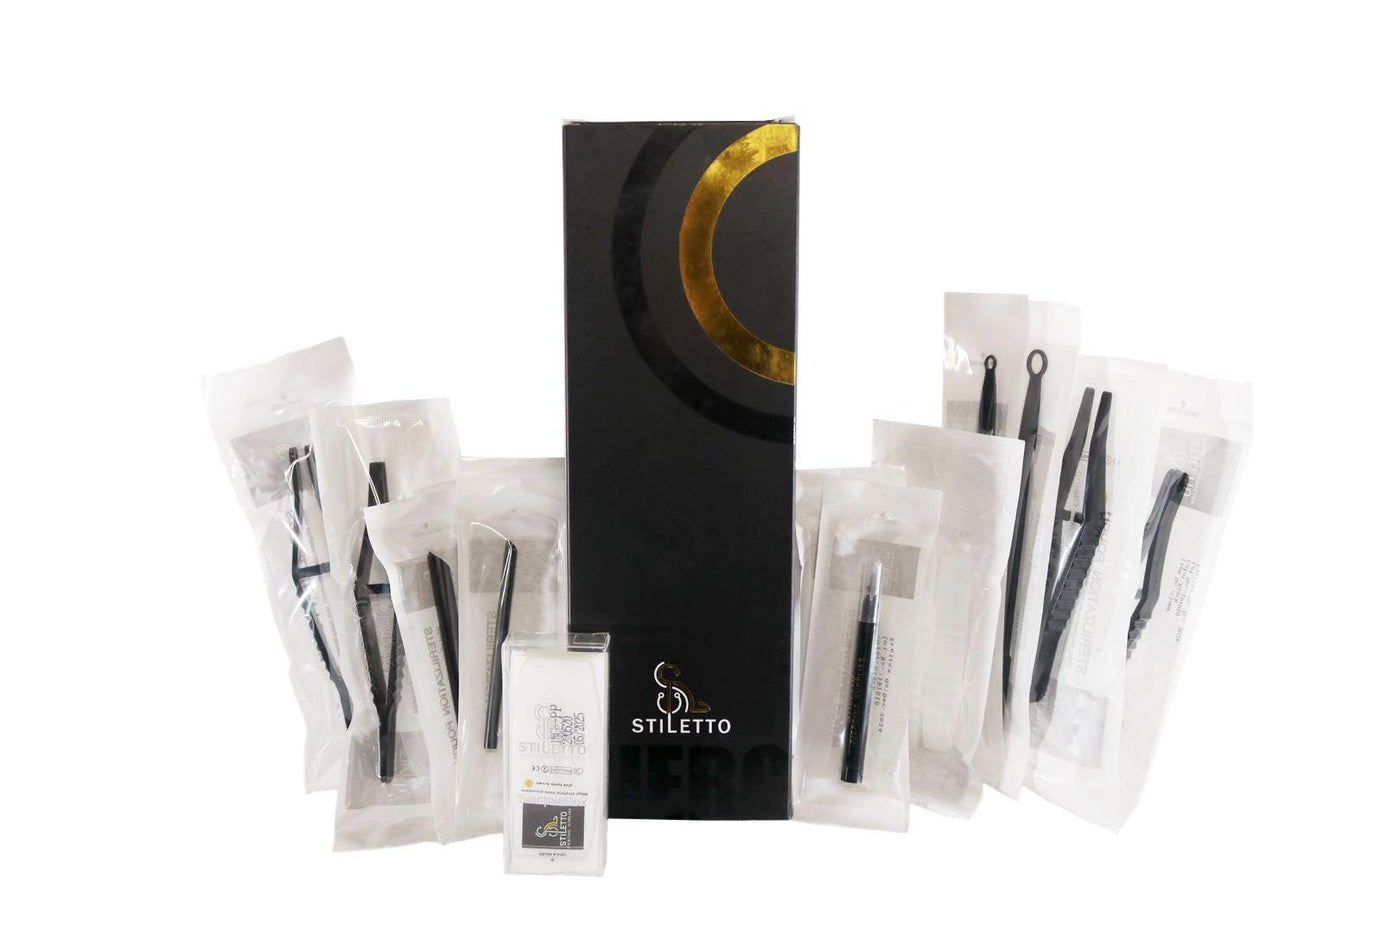 Stiletto Piercing Tools Sample Box - Disposable Piercing Tools - FYT Tattoo Supplies Canada